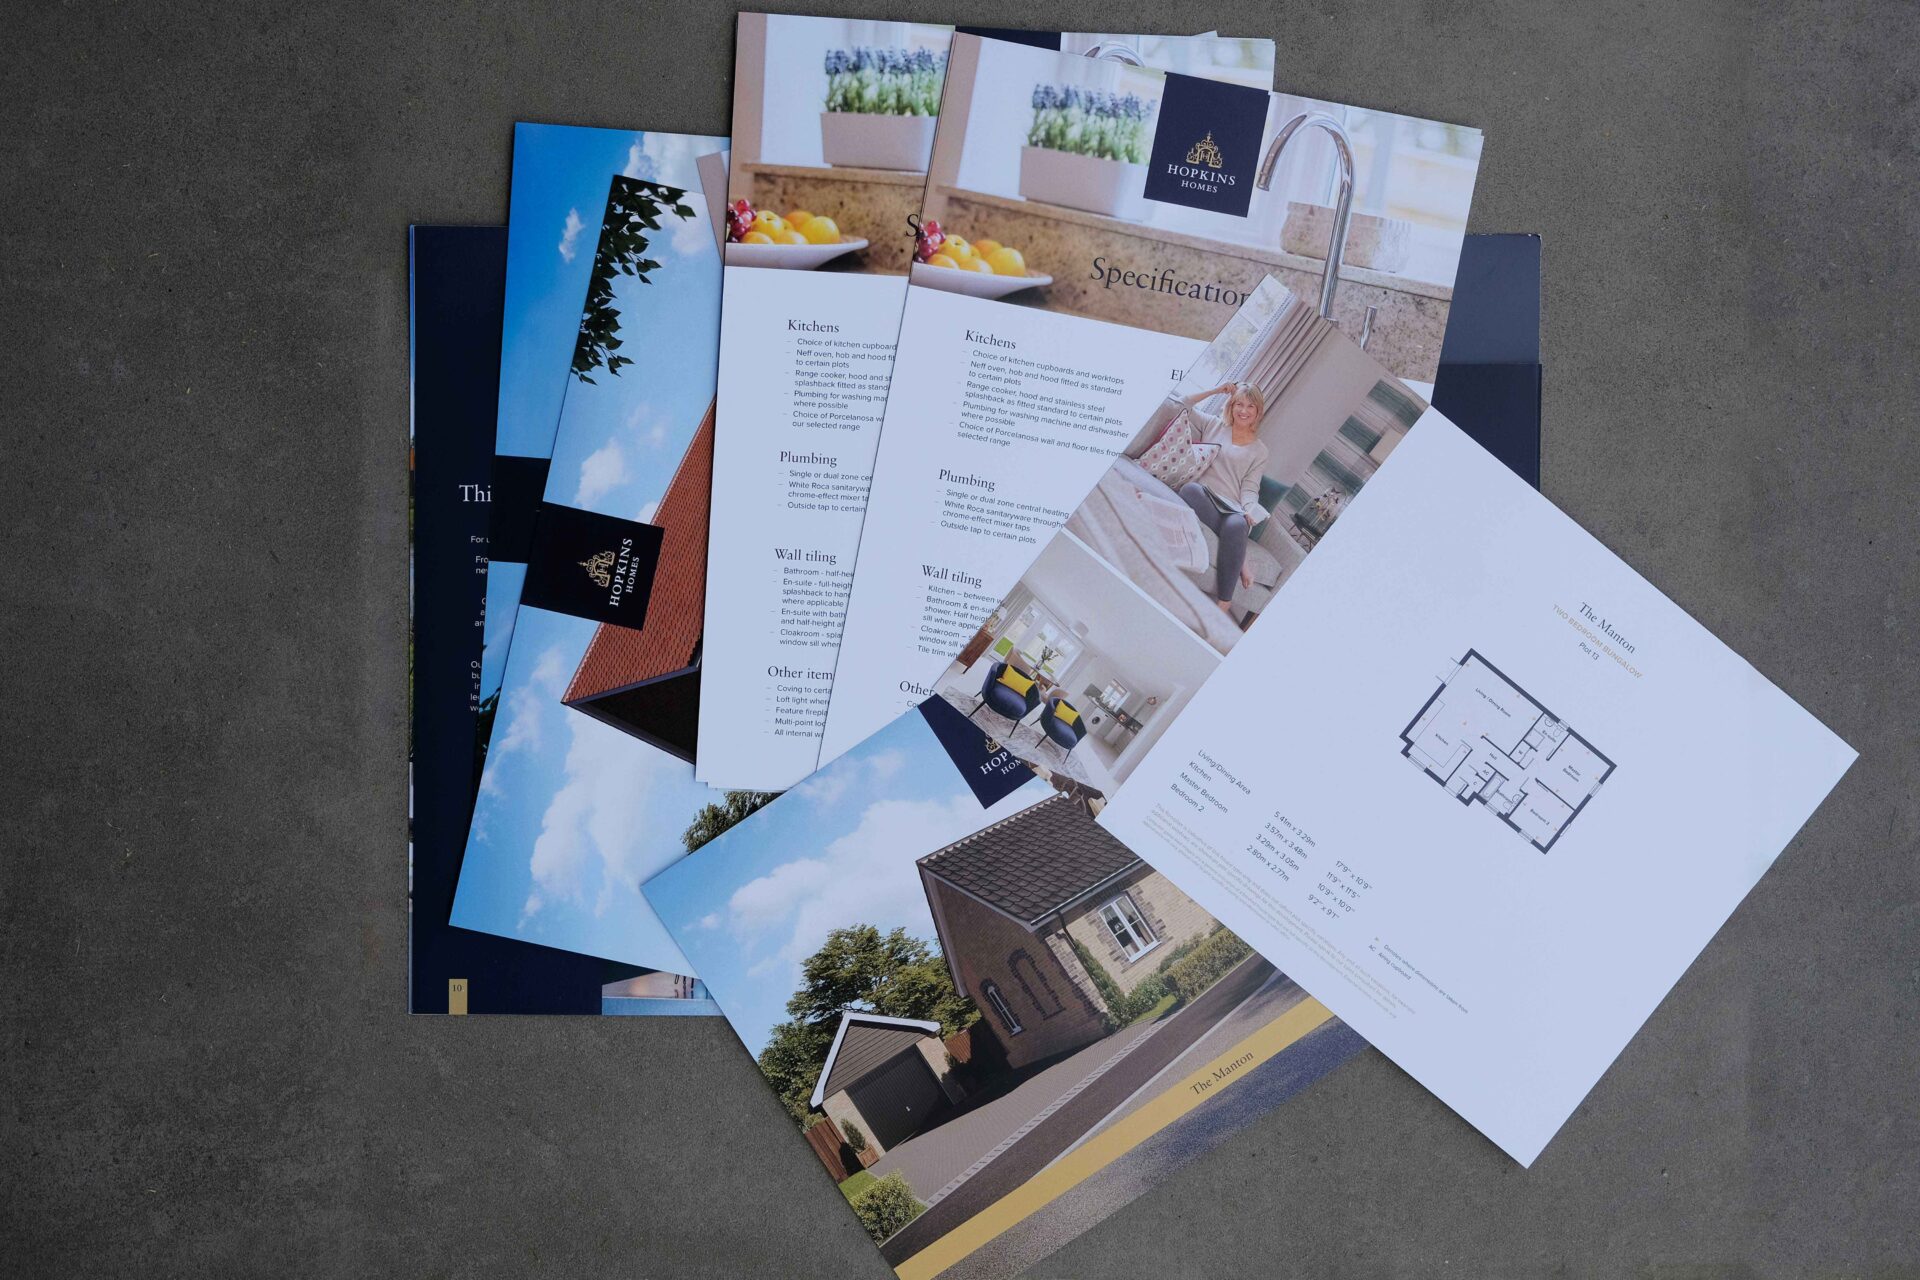 Fan of Hopkins Homes' brochure inserts including specifications, floorplans and CGIs of the homes